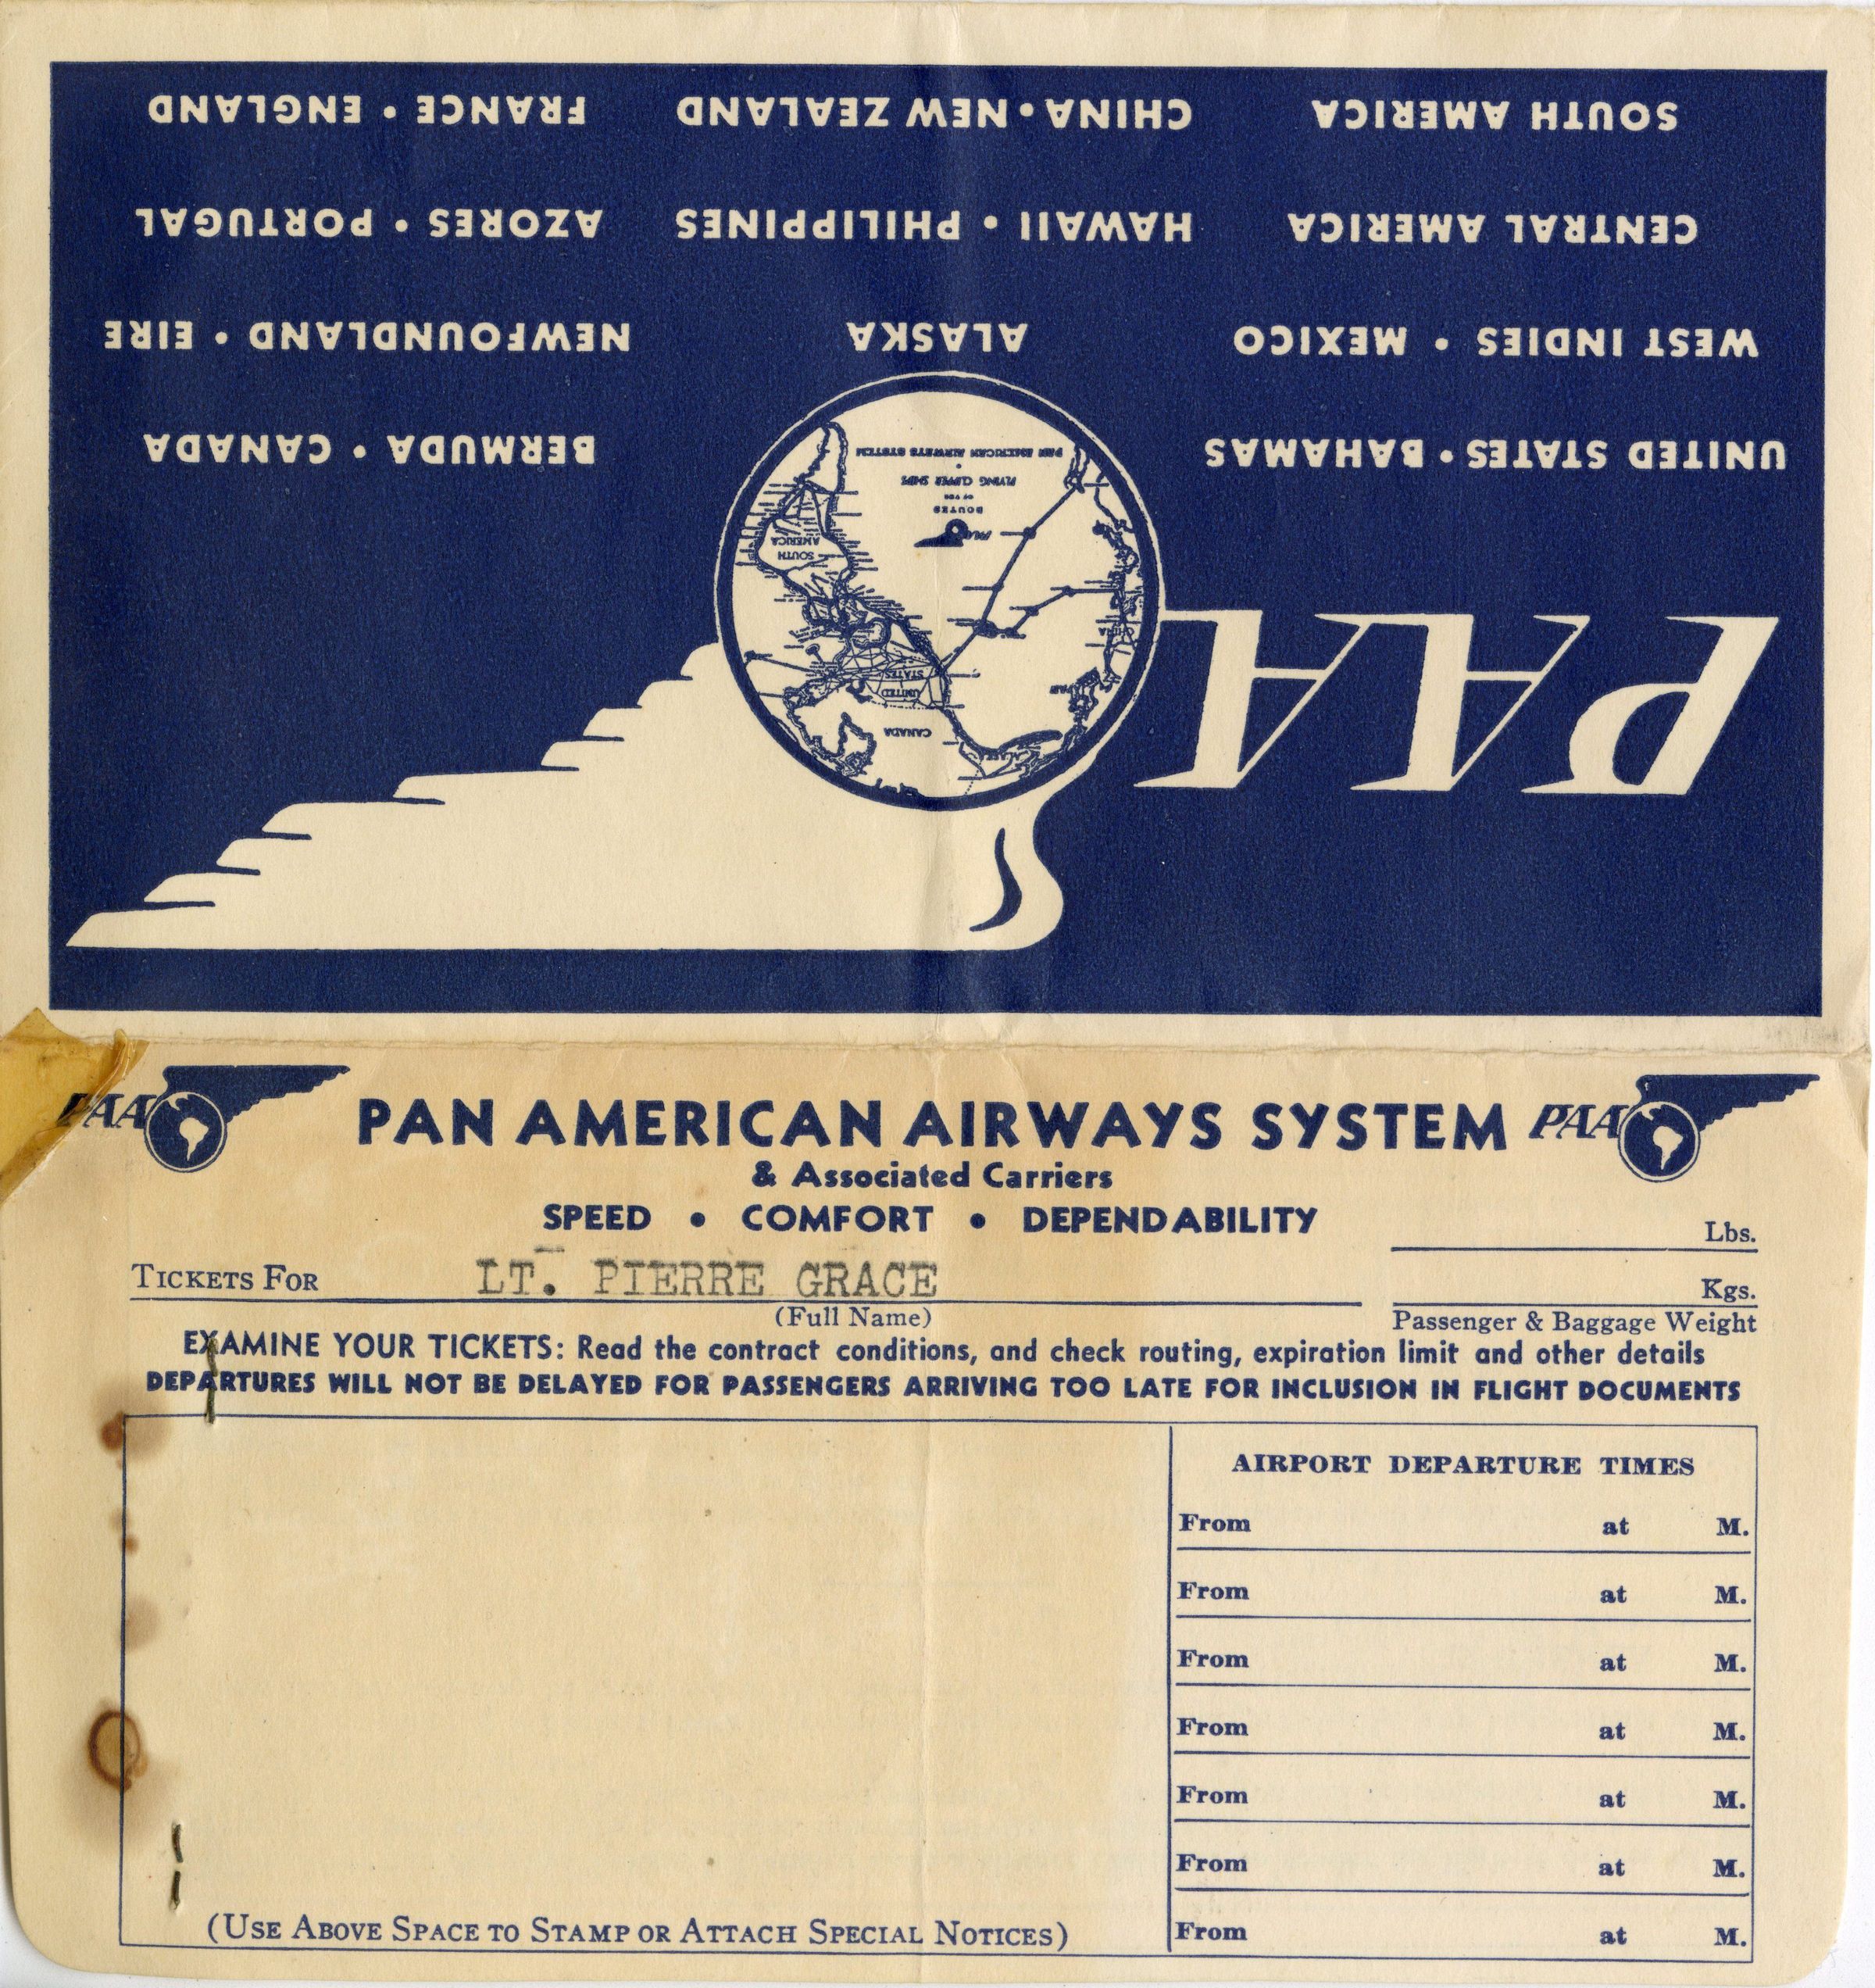 Primary Image of The Pan American Airways Tickets and Luggage Tags of Pierre Grace